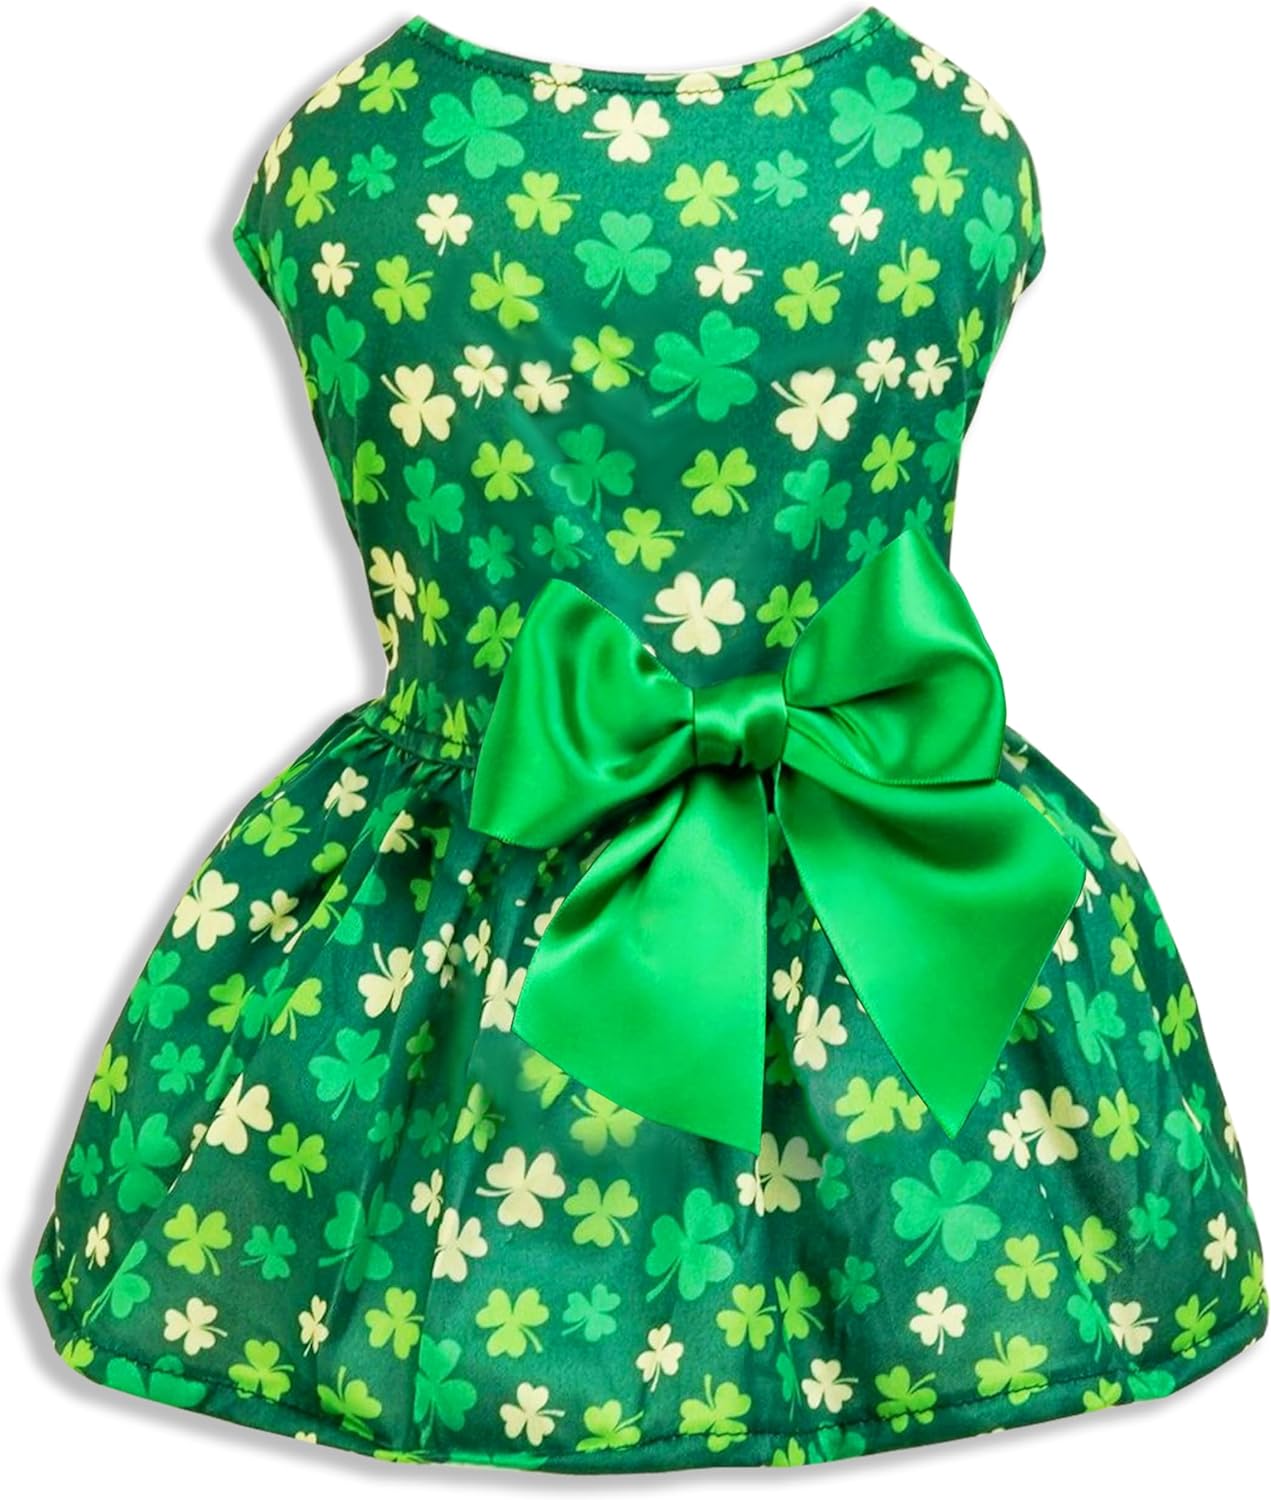 St. Patrick Day Dog Cat Dress, Holiday Irish Lucky Clover Shamrock Leaves Dress Outfits Skirt for Small Boys and Girls Puppies Pets Doggie